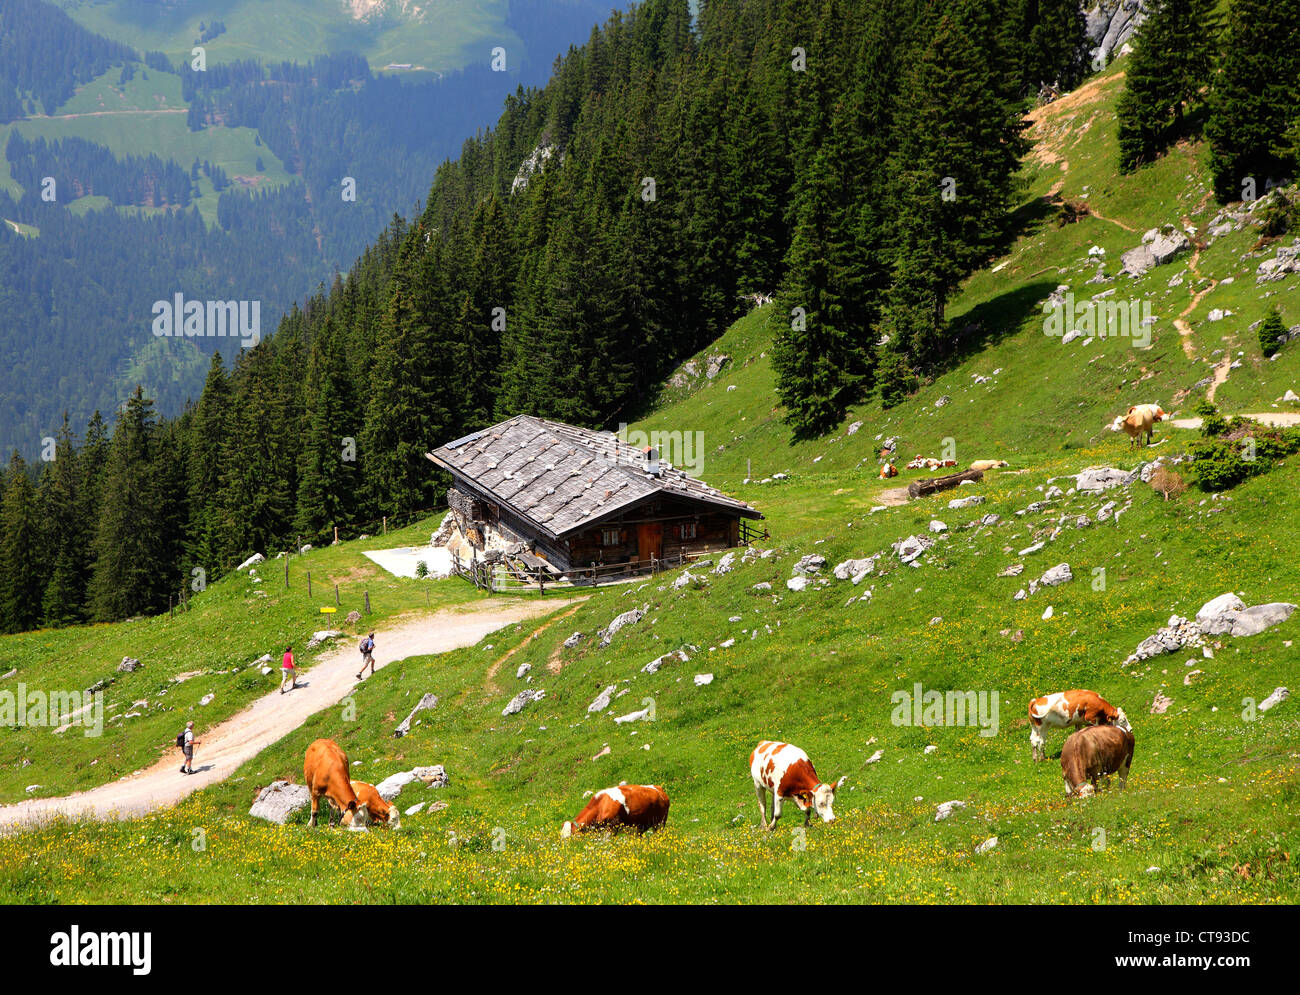 Mountain hiking path in the Mangfall mountains, Bavarian alps. Stock Photo